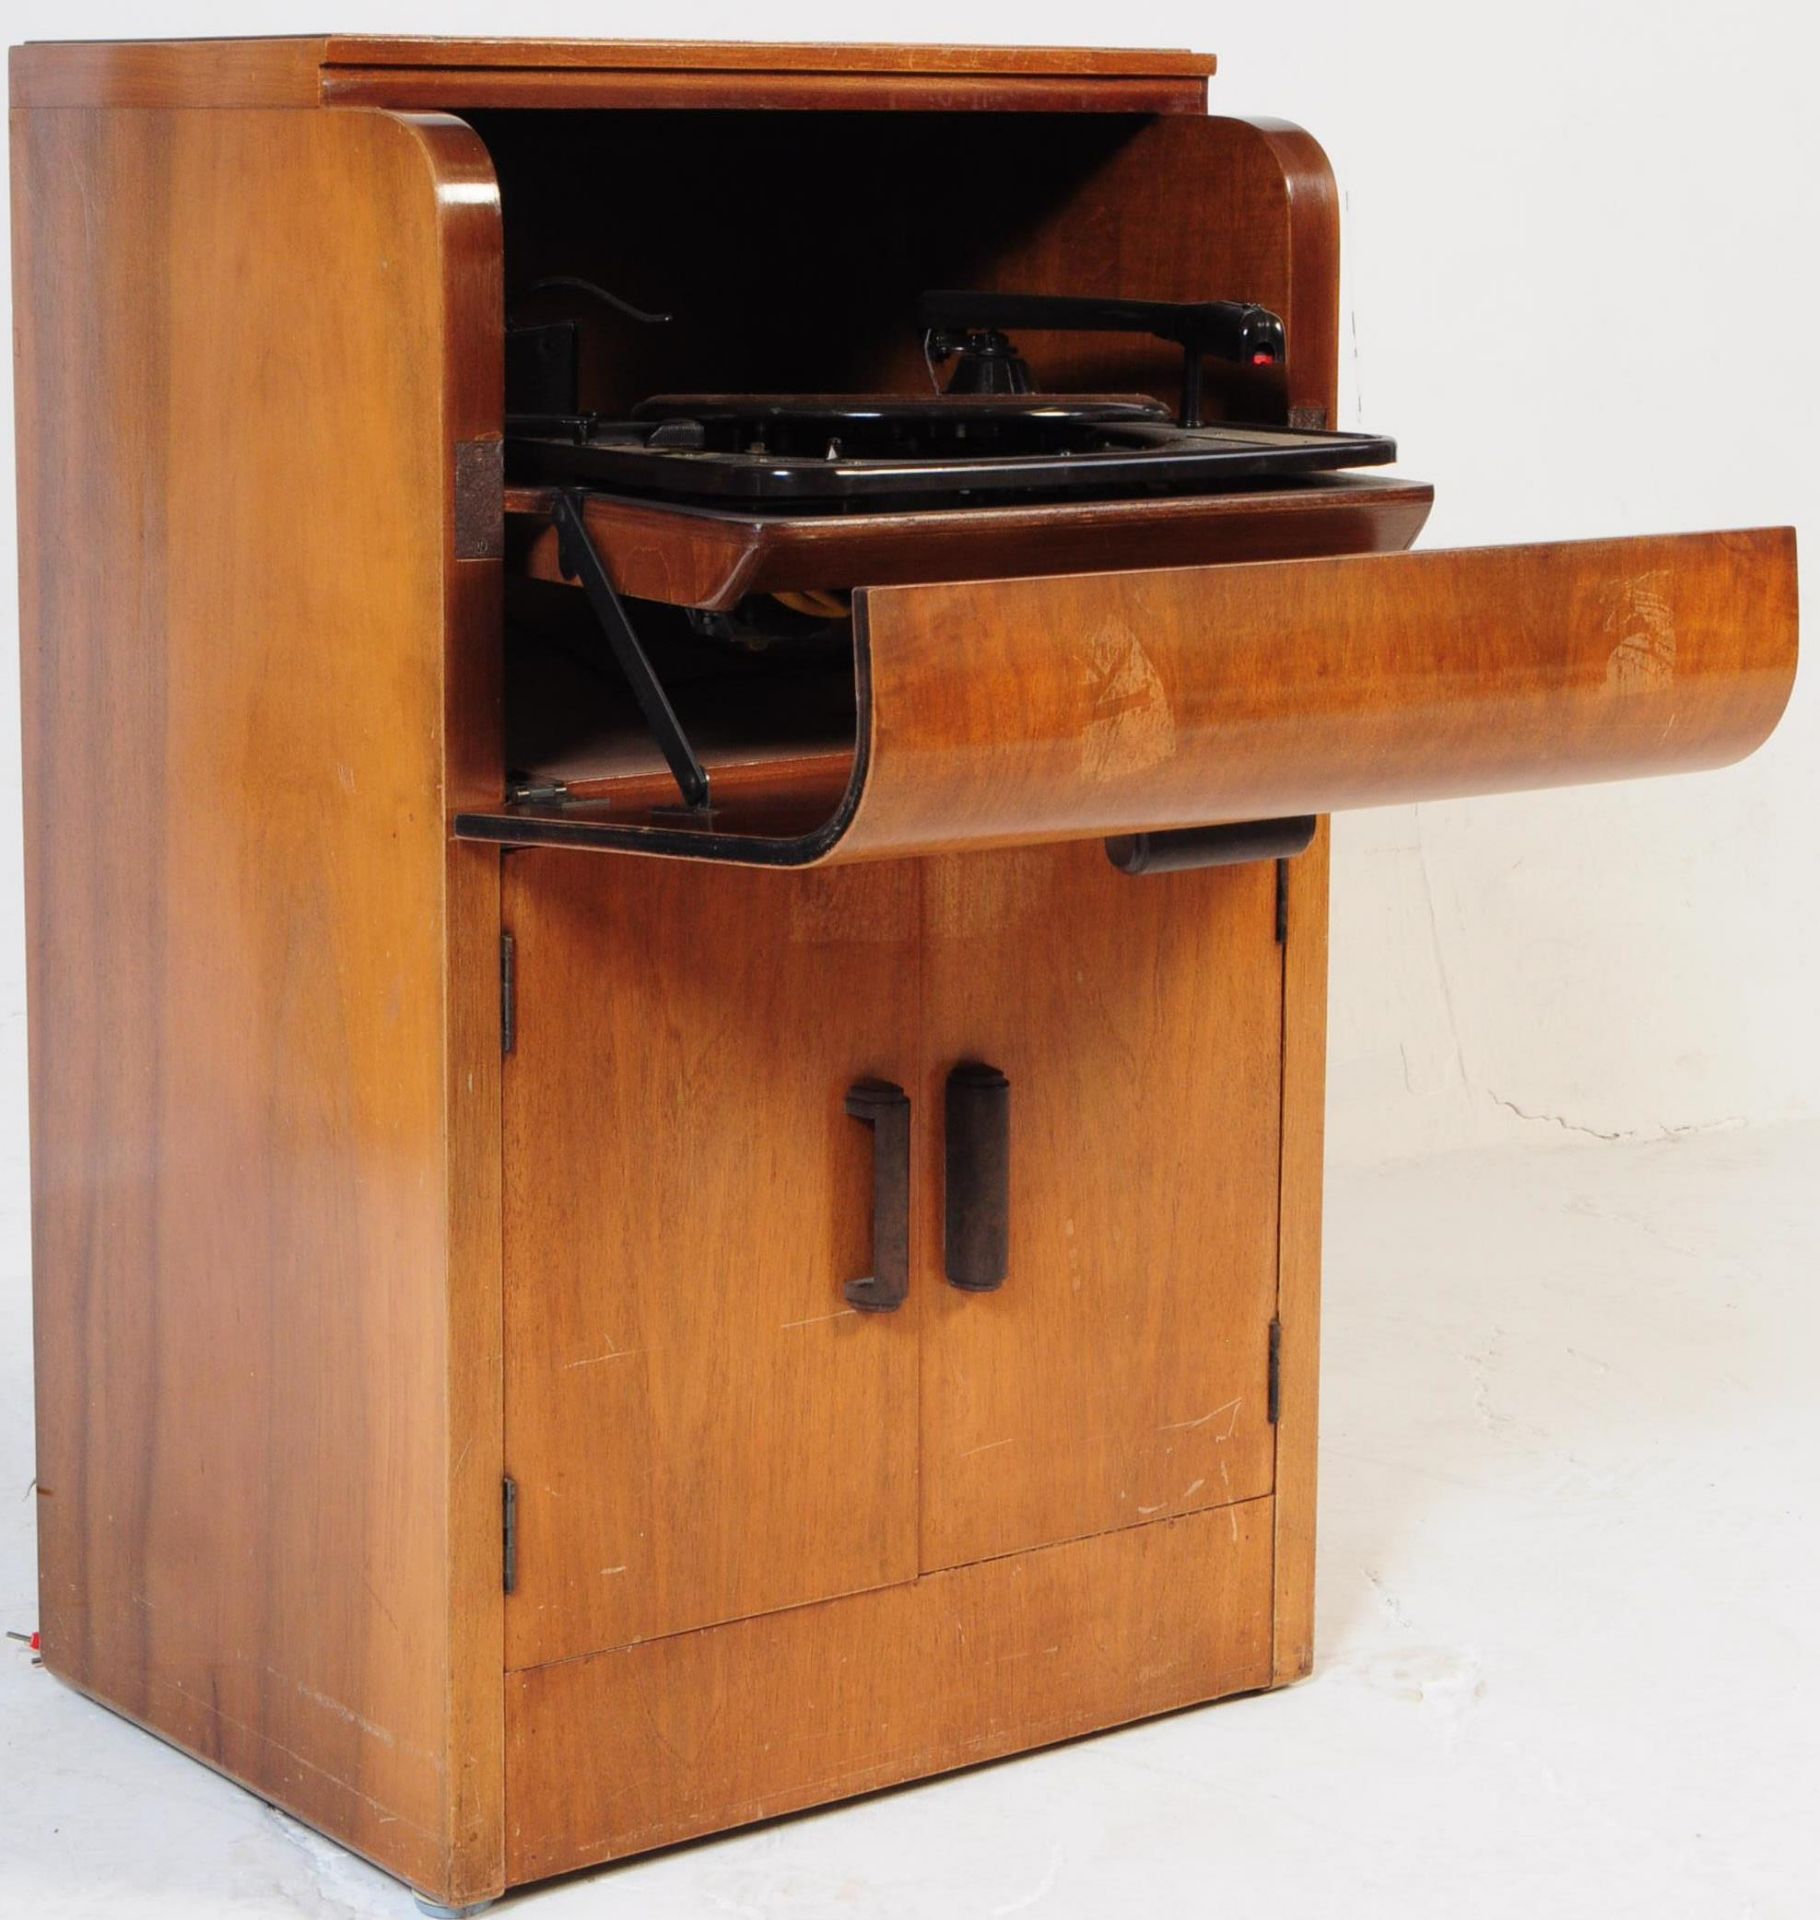 1930S ART DECO PLUS A GRAM RECORD CHANGER PLAYER - Image 2 of 8